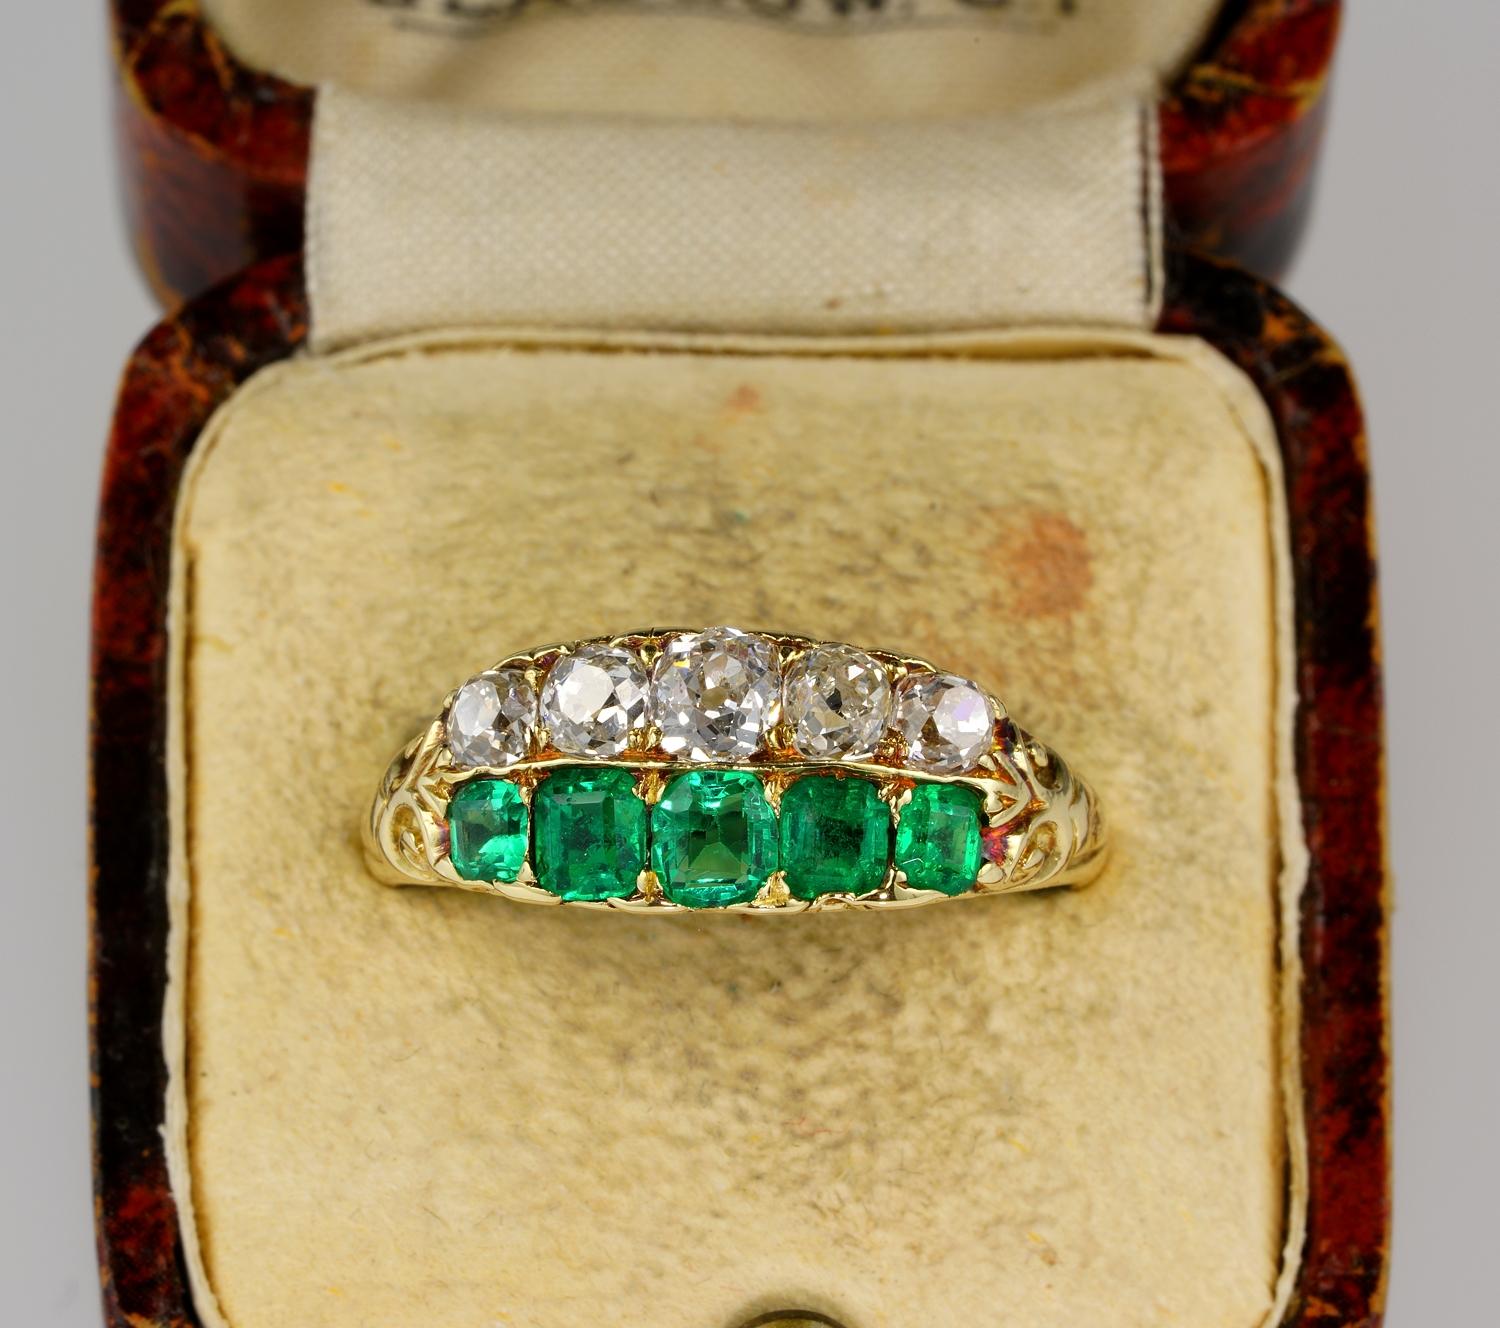 Getting the very Best

Spectacular rare find!

Authentic Victorian double row ring, set with two arrays of finest gemstone on earth
Hard to see any similar to this one, being very distinctive and unusual, also for the stunning Emerald which are MUZO